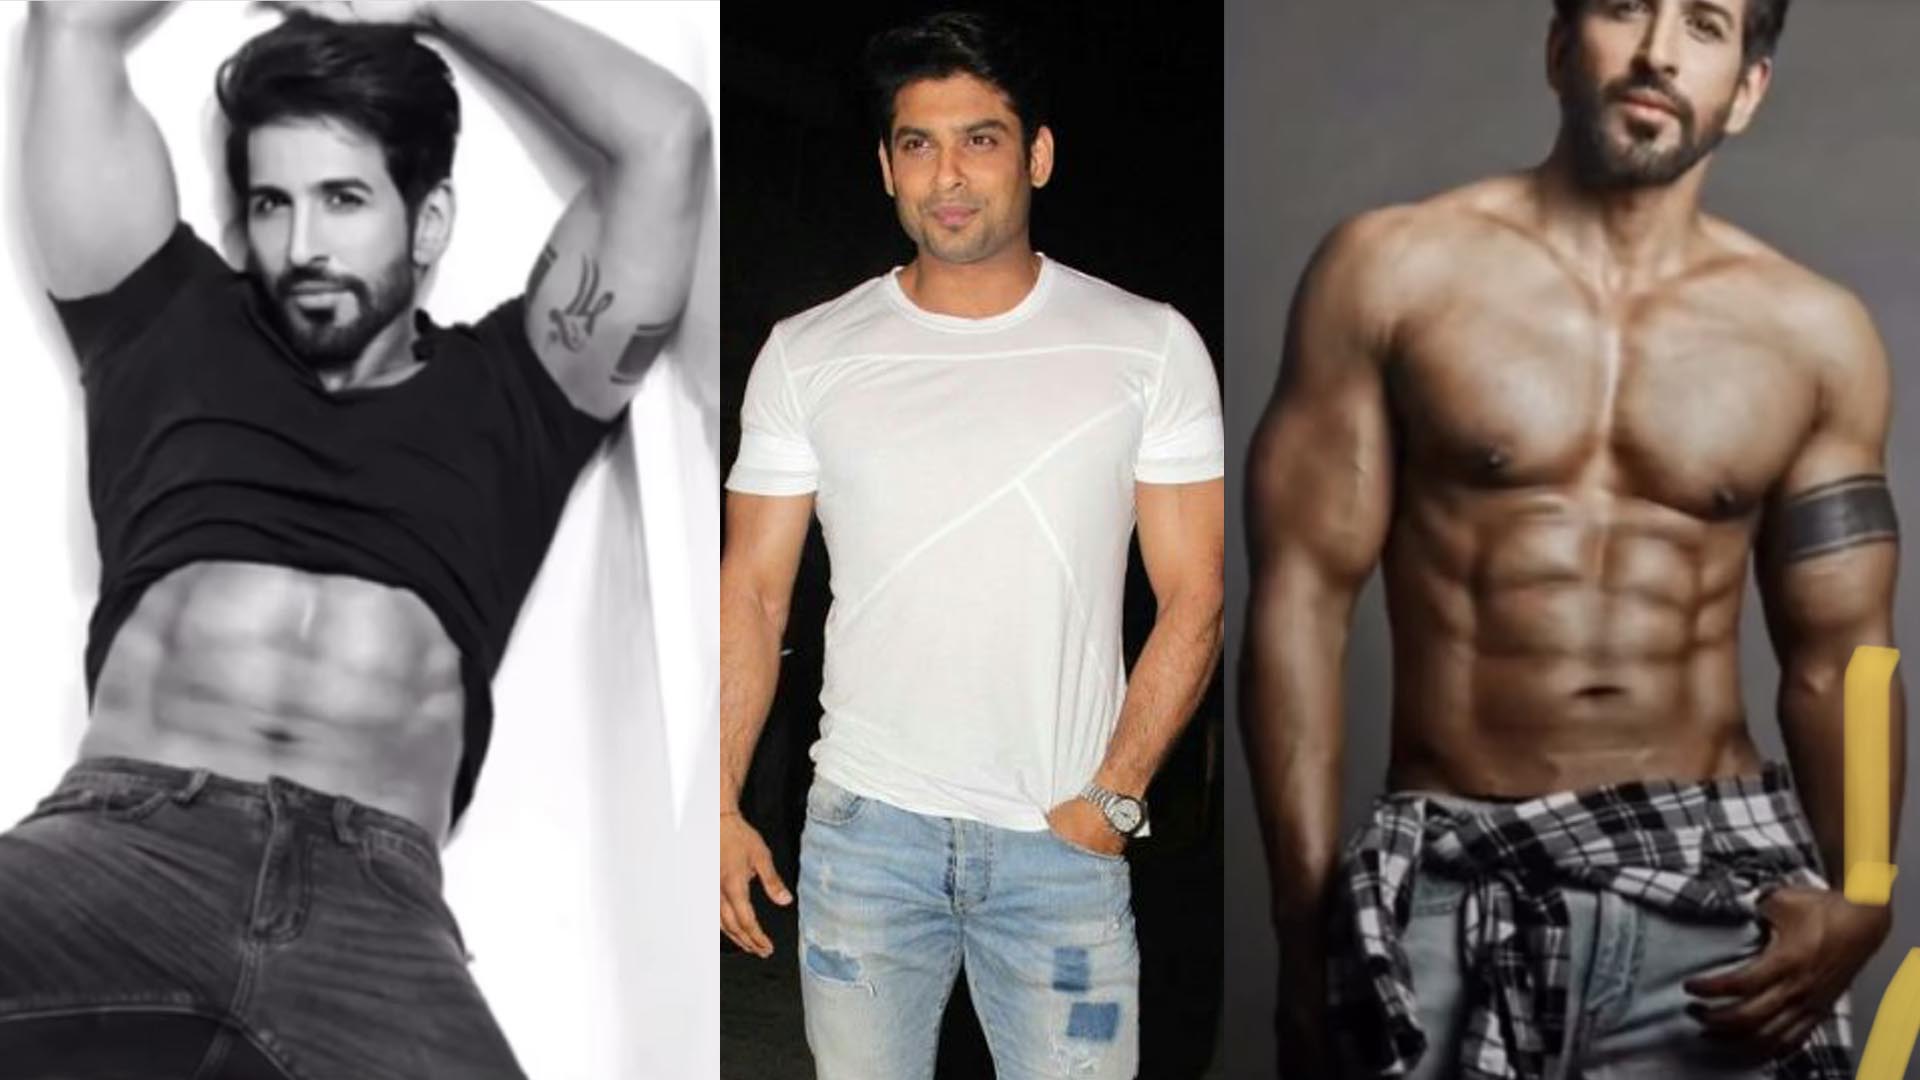 Sidharth Shukla’s last project was with this Bigg Boss contestant!